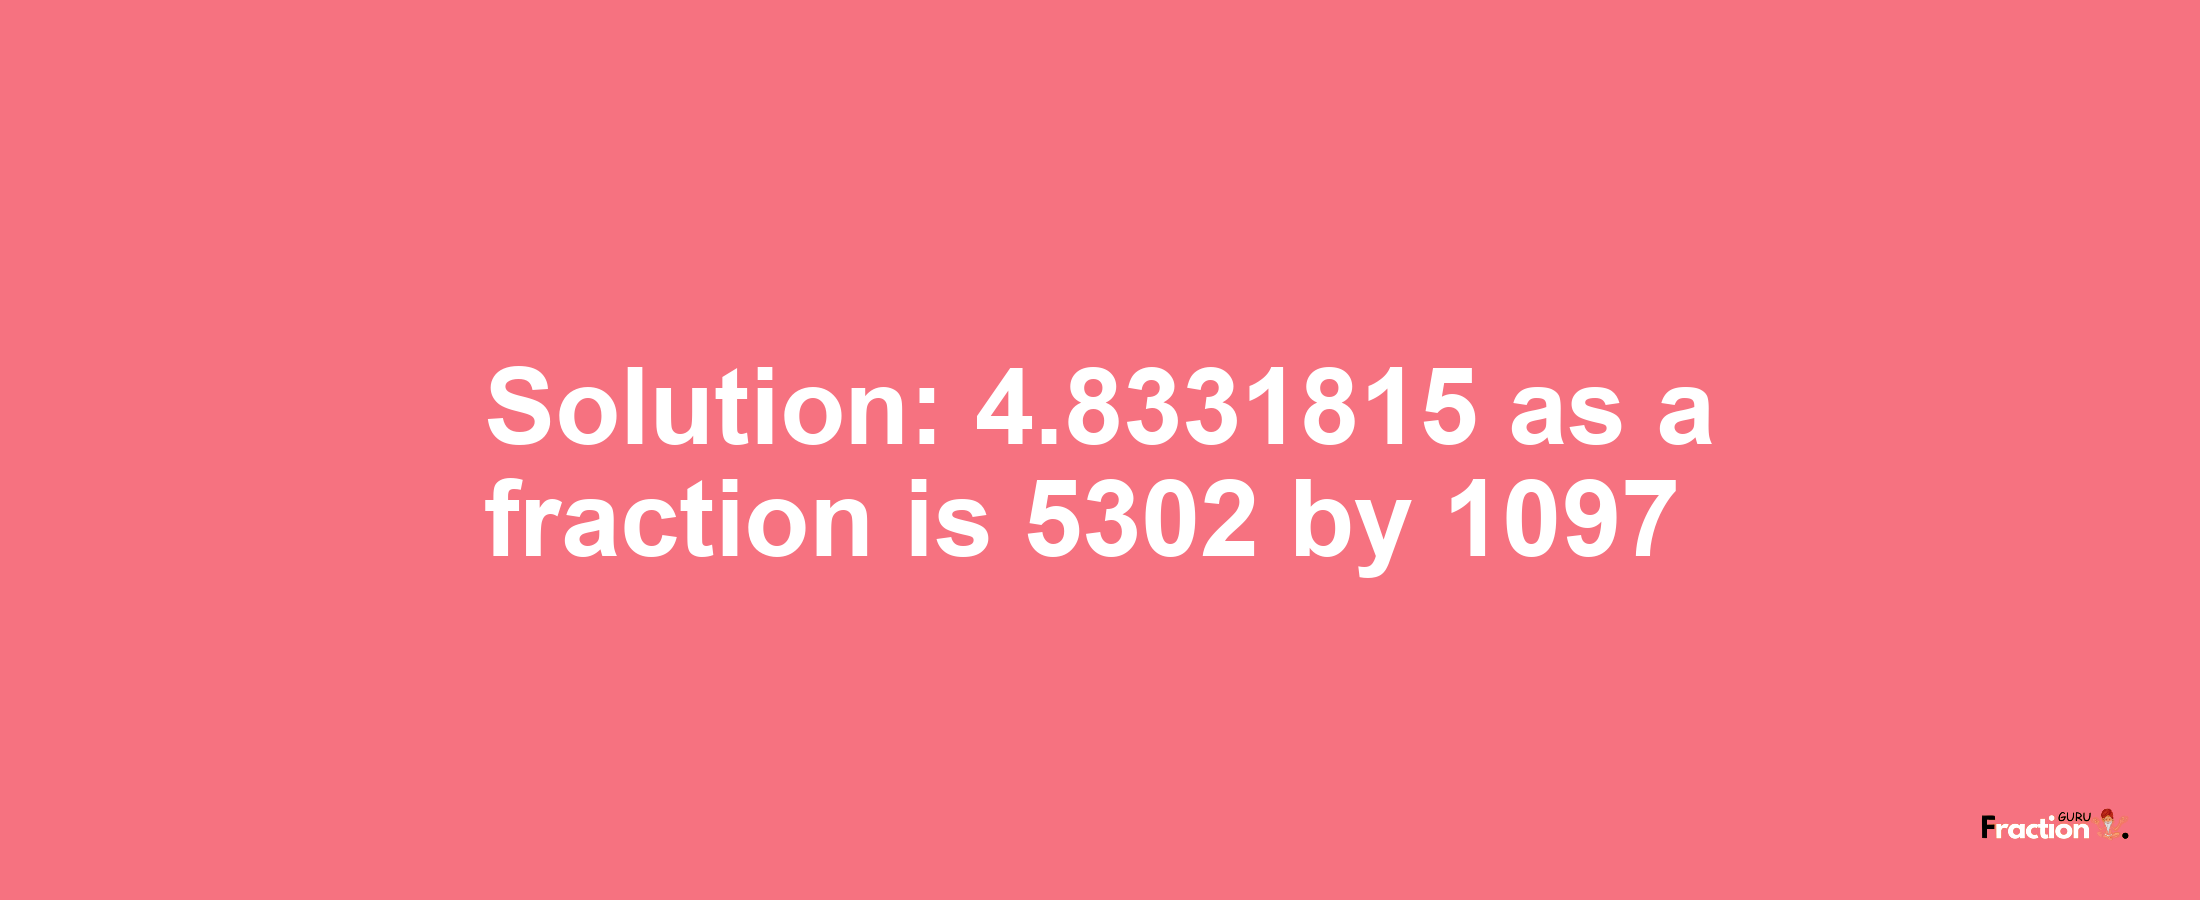 Solution:4.8331815 as a fraction is 5302/1097